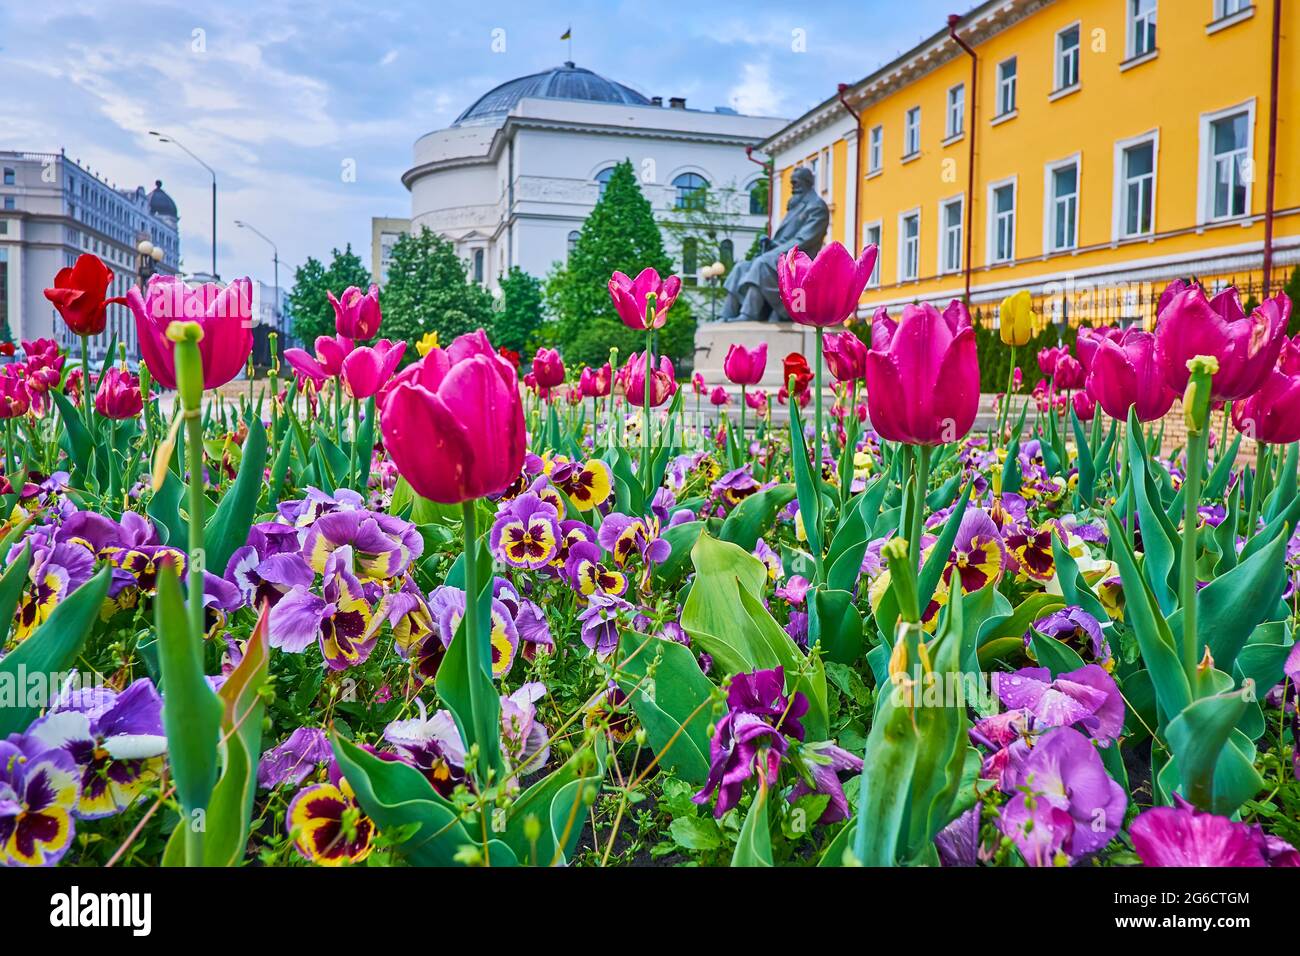 The flower bed with blooming tulips and pansies next to the monument to Mykhailo Hrushevsky with a Teacher's House in background, Volodymyrska street, Stock Photo